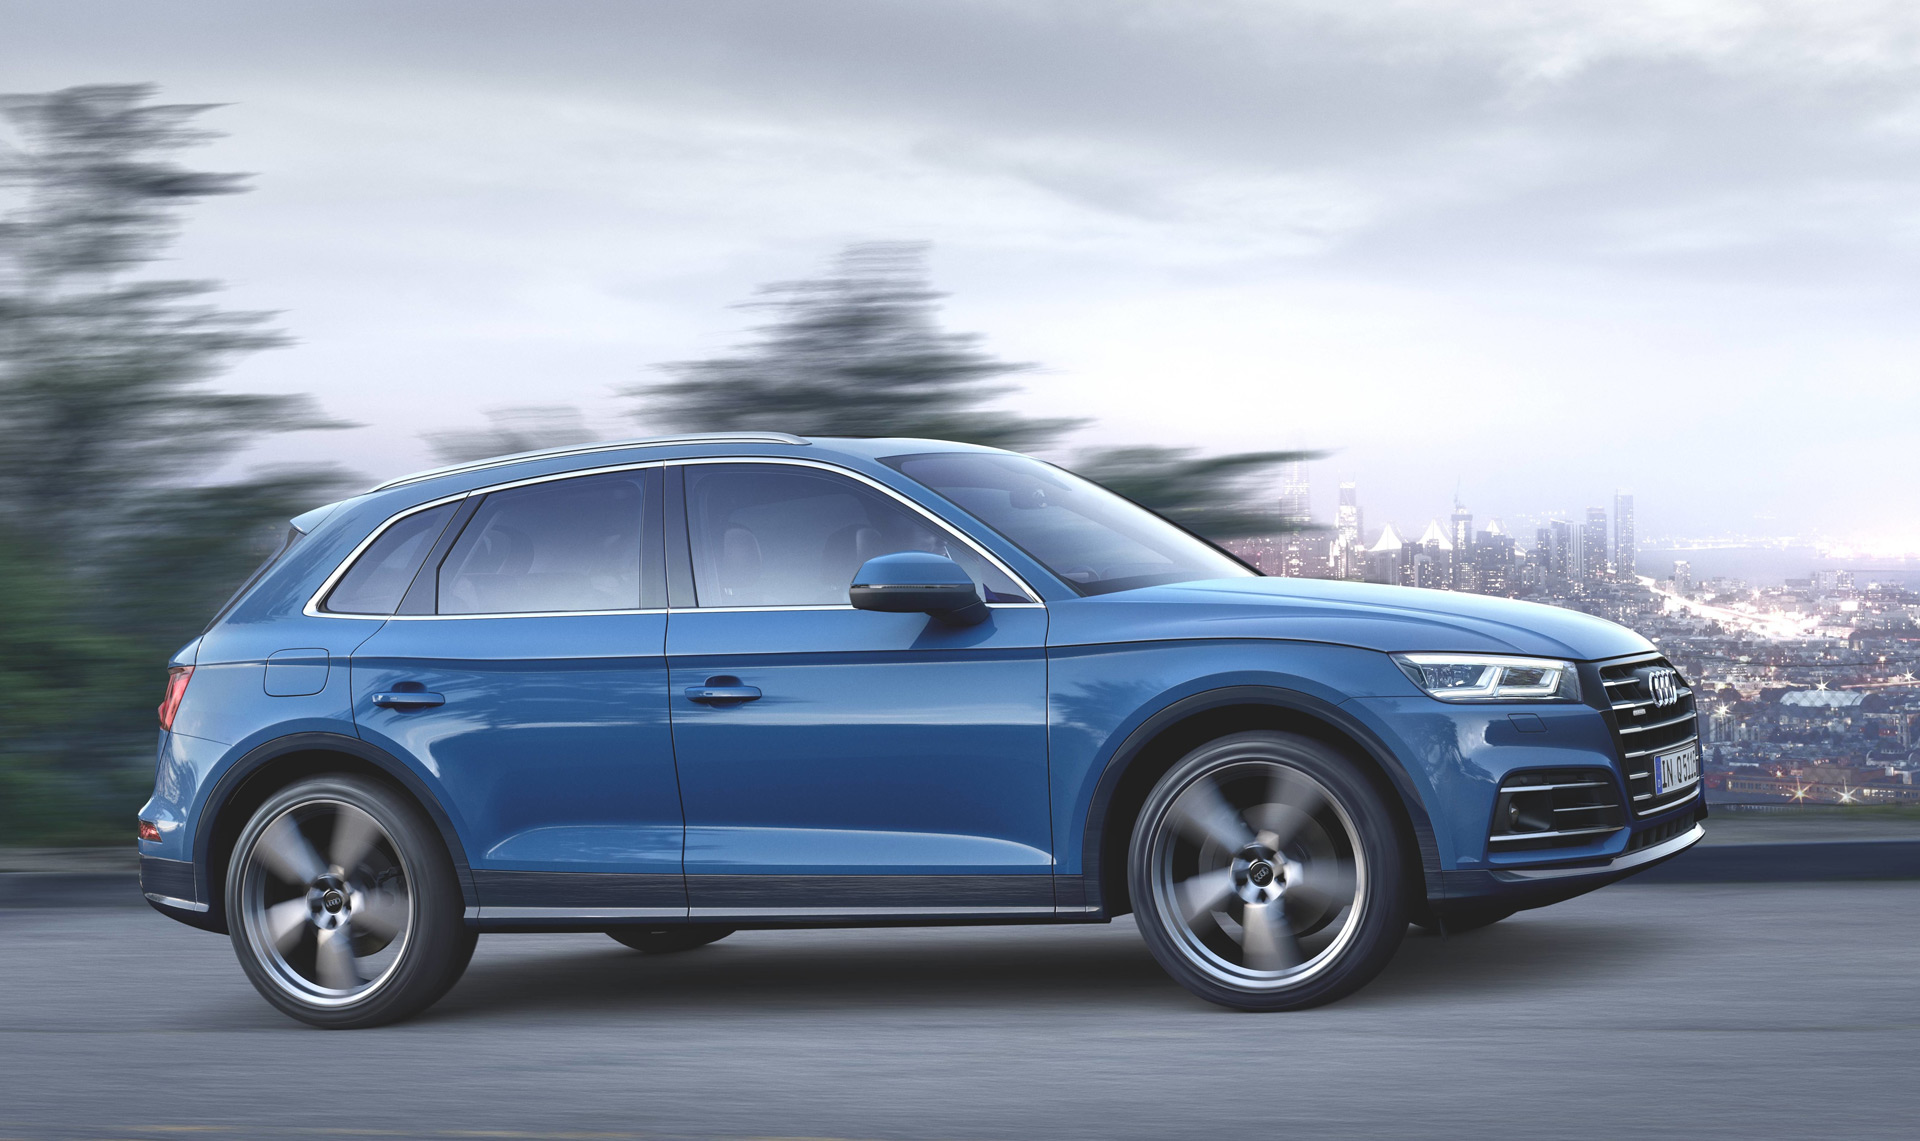 2020 Audi Q5 55 TFSI revealed as first of Audi's next-gen plug-in hybrids